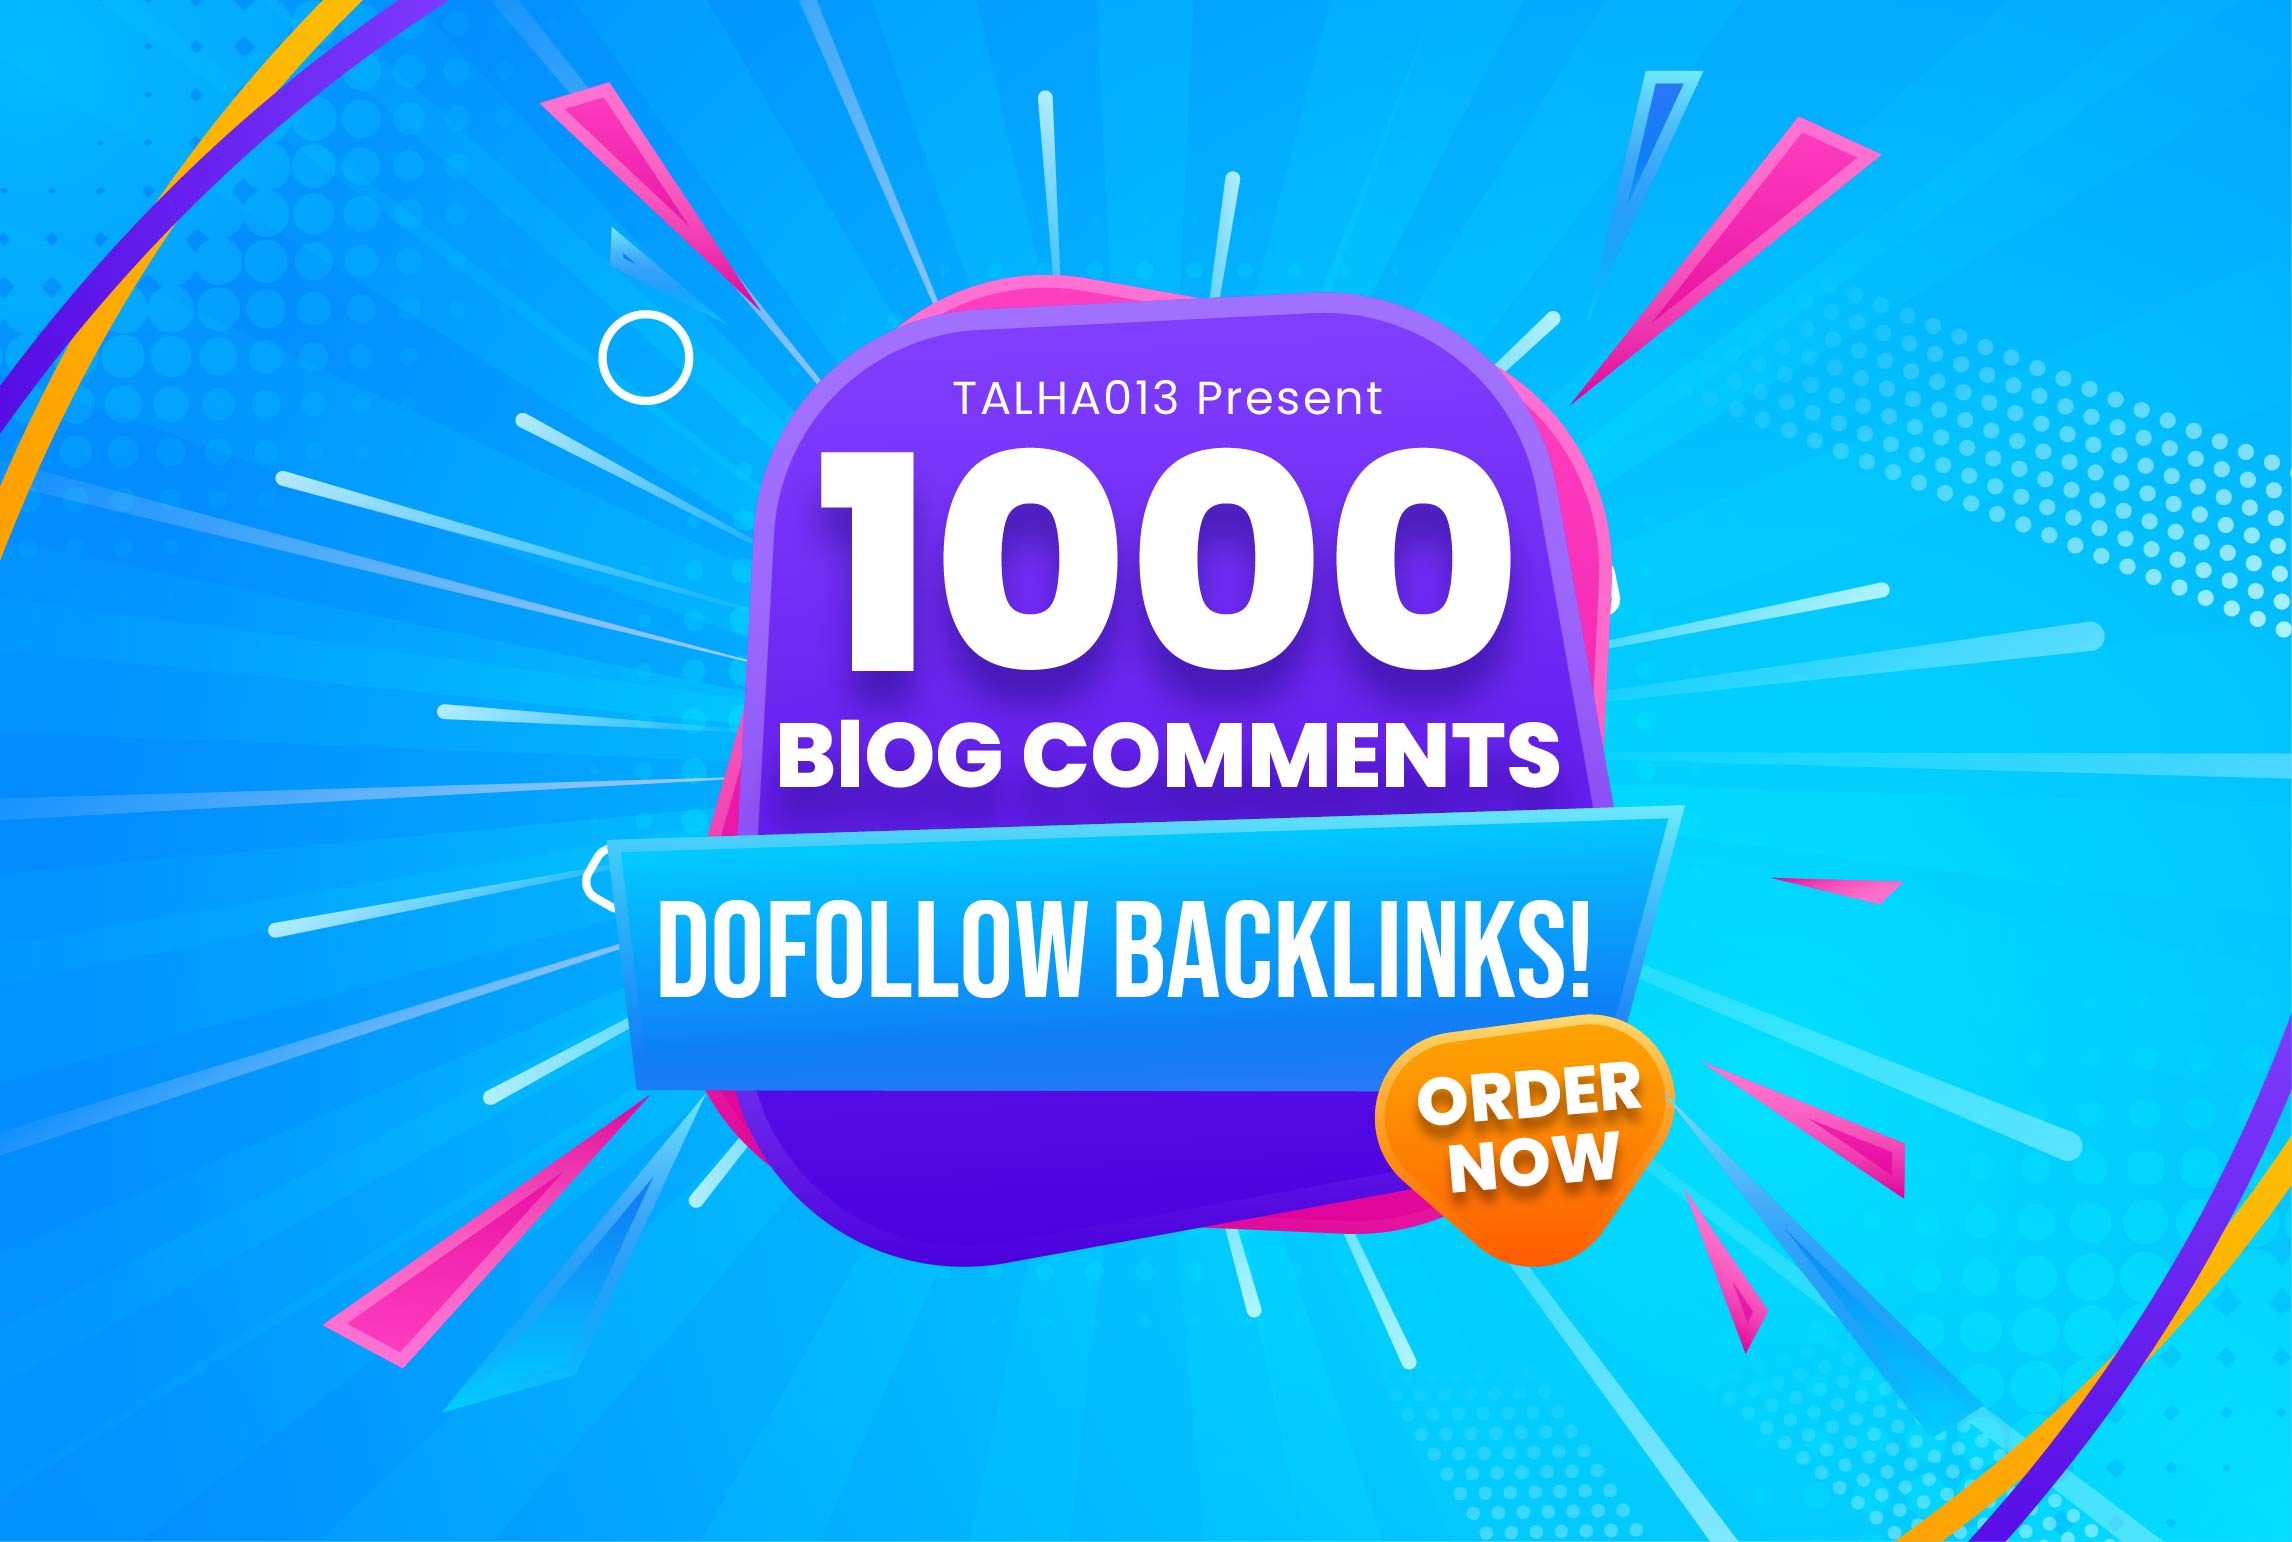 I will create high quality backlinks with expert blog commenting services